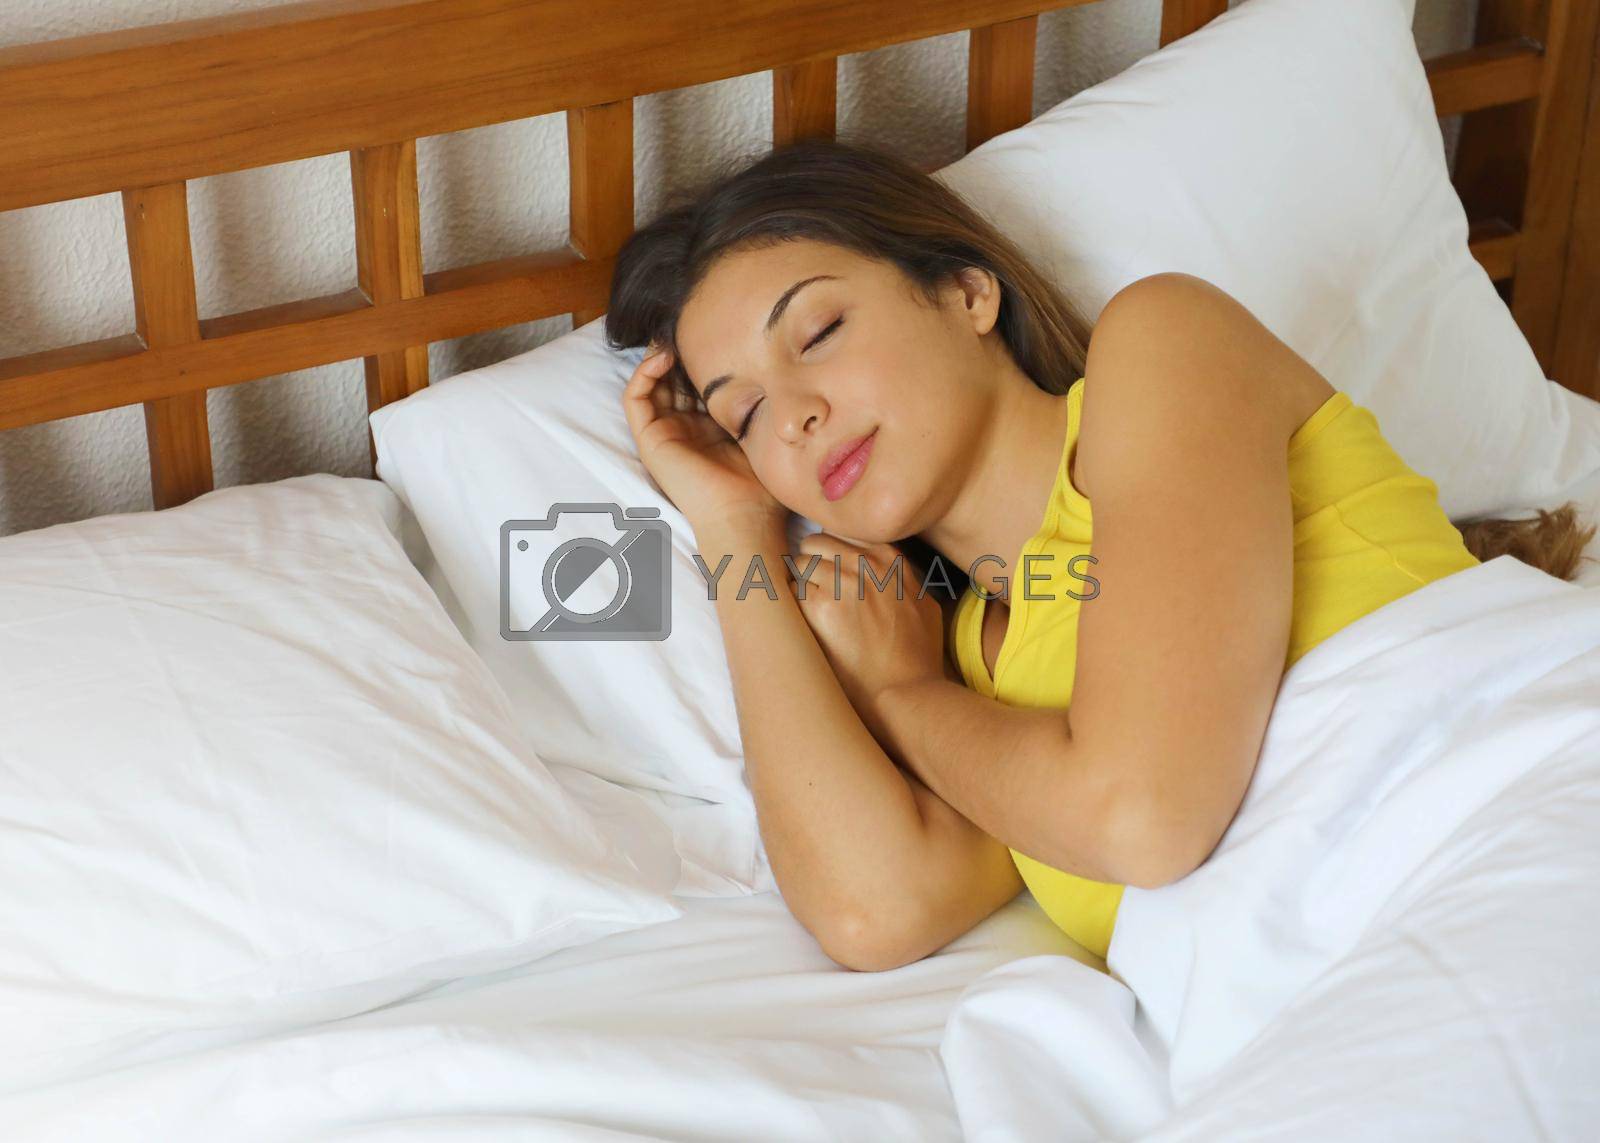 Royalty free image of Brazilian woman sleeping in bed in white comfortable sheets at home by sergio_monti